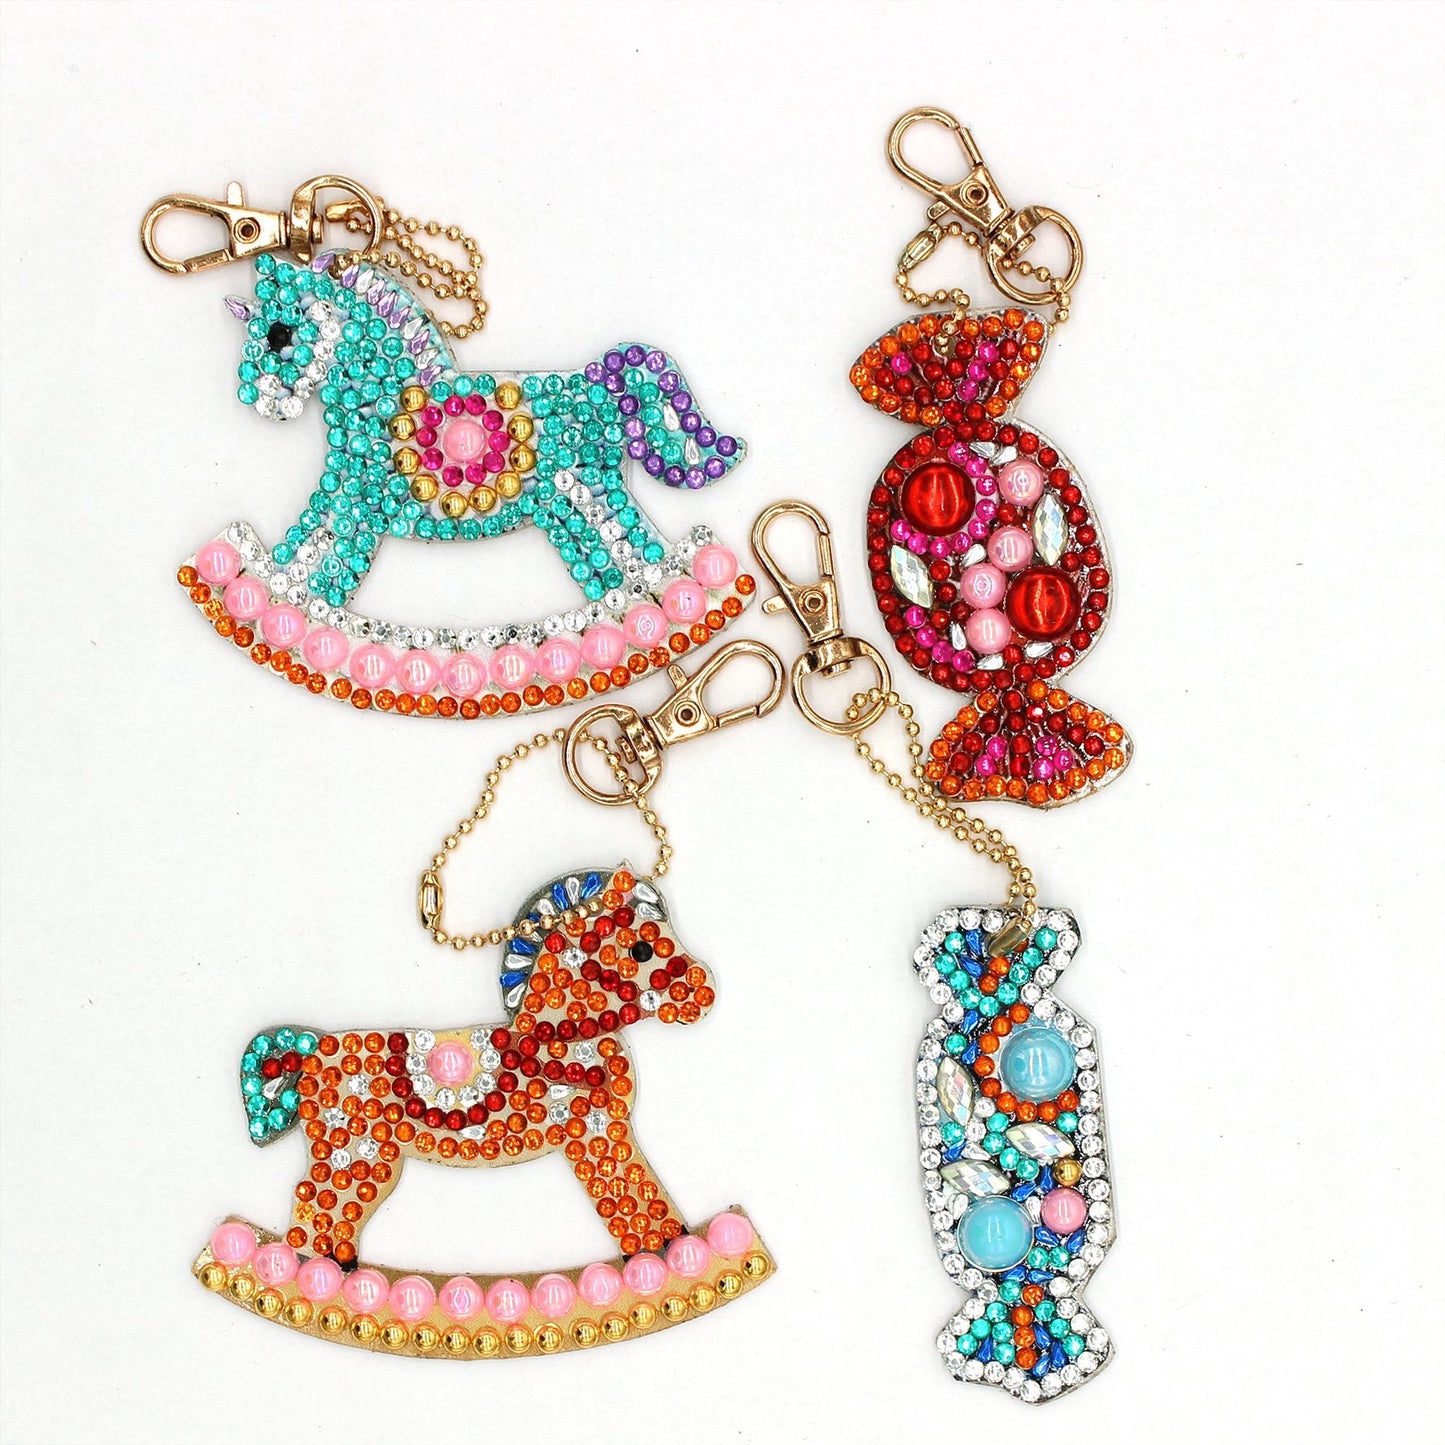 Double-sided stickers special diamond painted keychain key ring-Trojan Horse